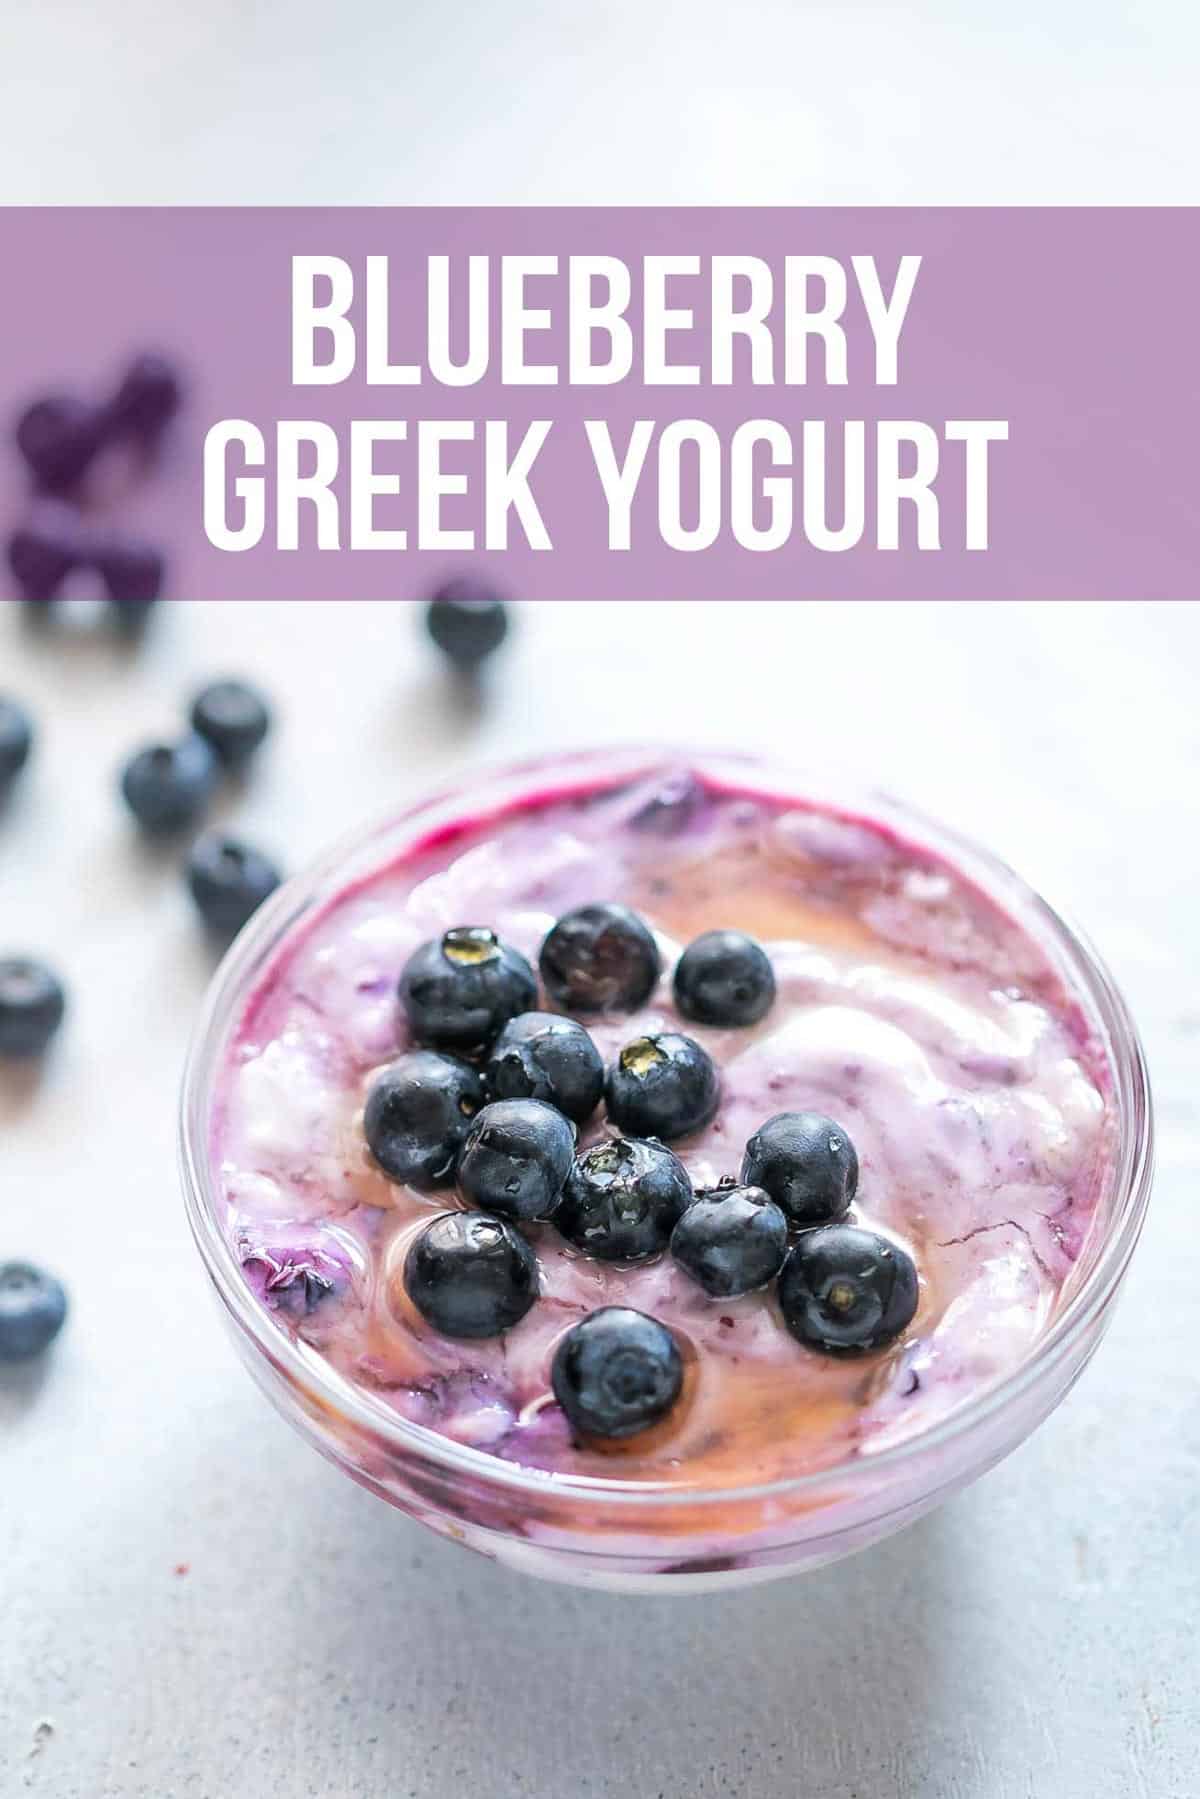 Blueberry greek yogurt served in a bowl with blueberries and honey drizzled on top